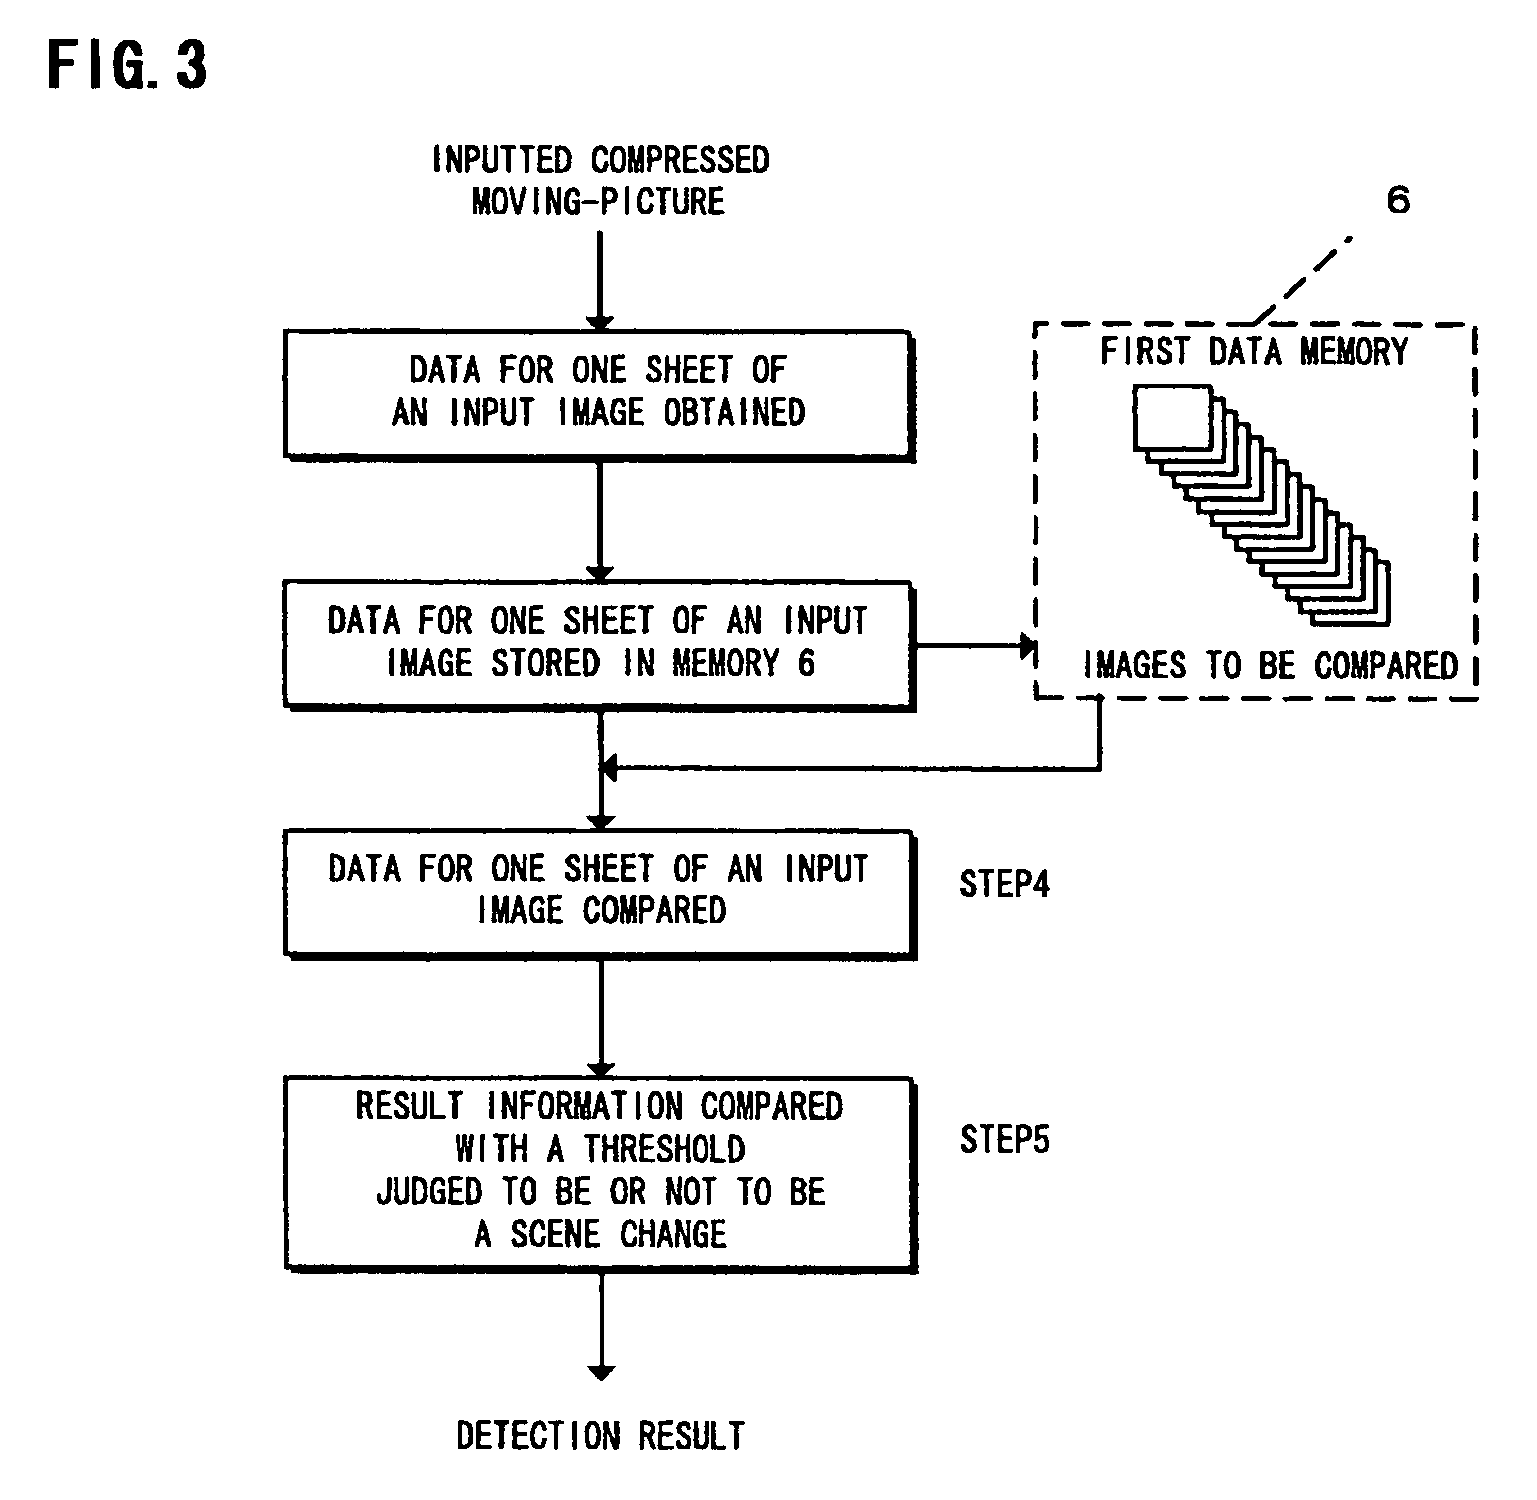 Method and apparatus for detecting scene change of a compressed moving-picture, and program recording medium therefor